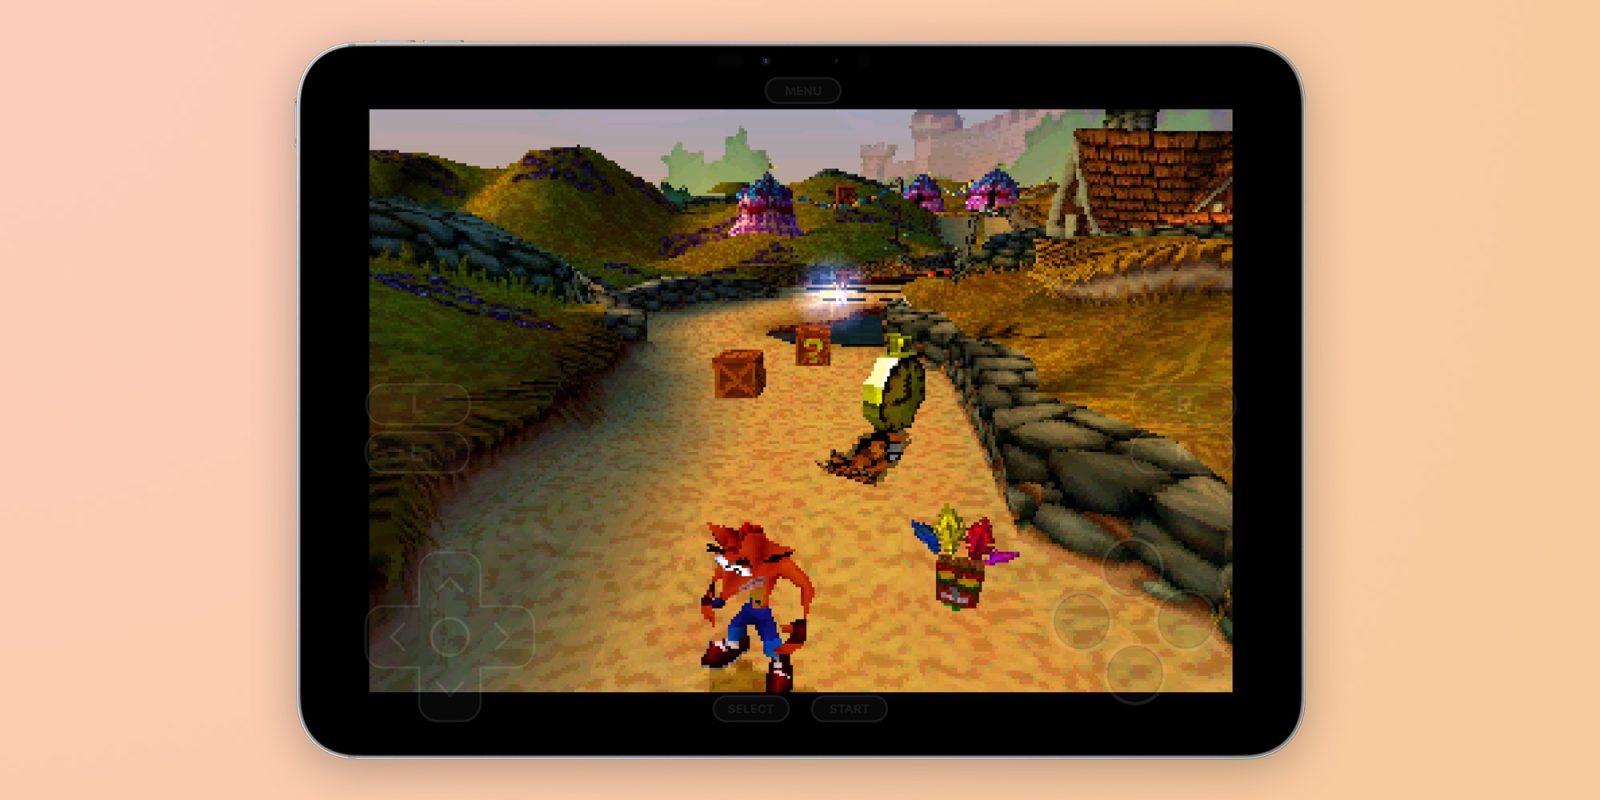 Gamma is a free PlayStation emulator available on the iOS App Store